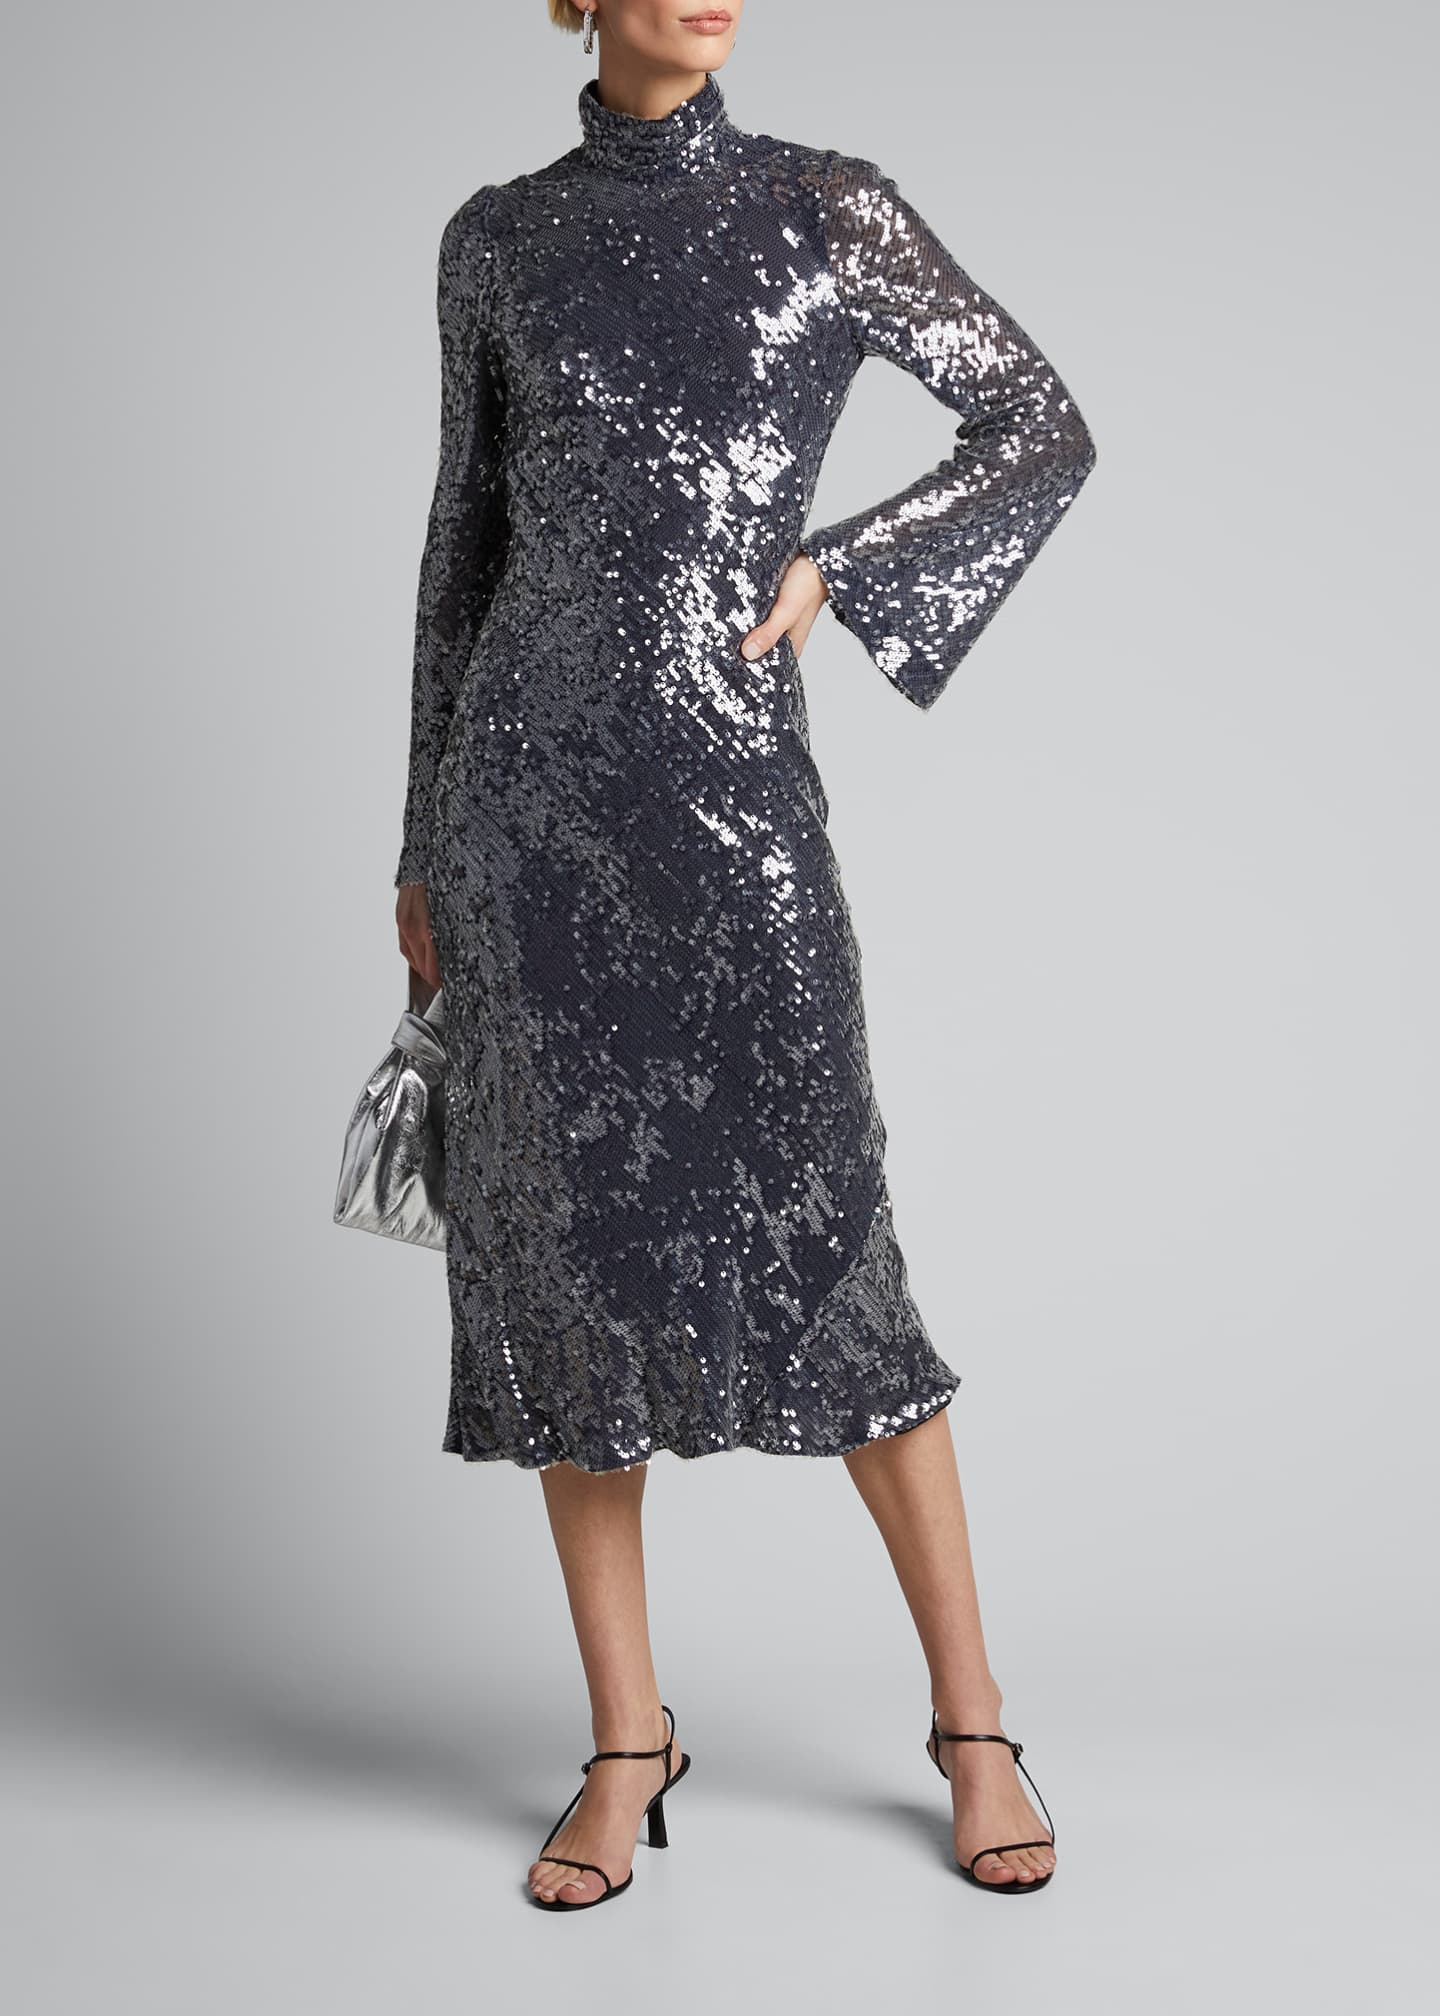 Pamella Roland Ostrich Feather Ombre Sequin Embroidered Cocktail Dress